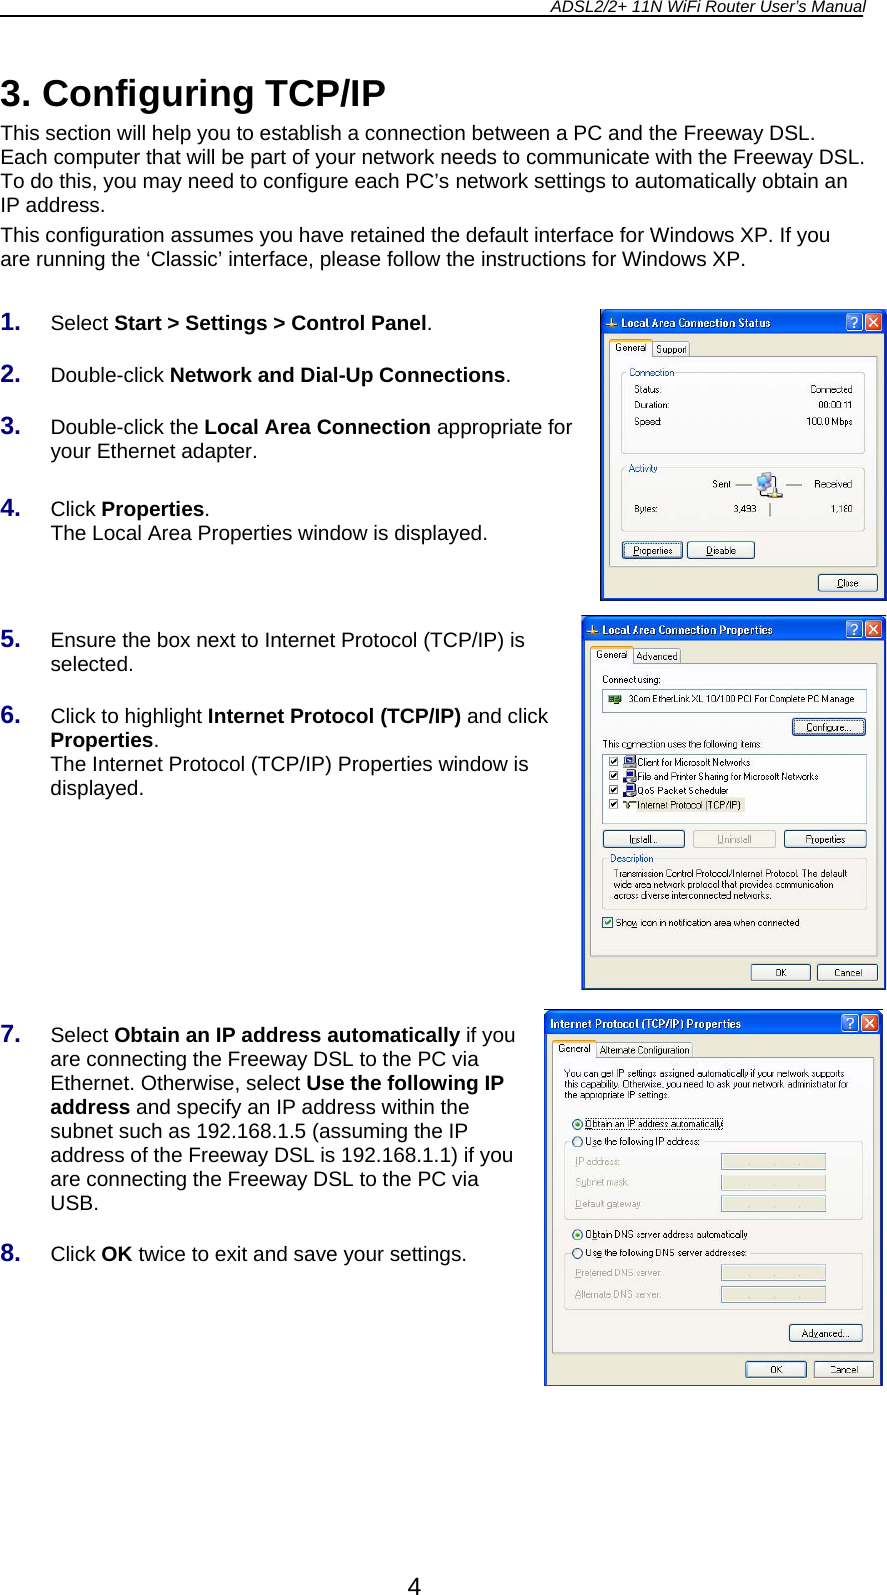 ADSL2/2+ 11N WiFi Router User’s Manual  4 3. Configuring TCP/IP This section will help you to establish a connection between a PC and the Freeway DSL. Each computer that will be part of your network needs to communicate with the Freeway DSL. To do this, you may need to configure each PC’s network settings to automatically obtain an IP address. This configuration assumes you have retained the default interface for Windows XP. If you are running the ‘Classic’ interface, please follow the instructions for Windows XP.  1.  Select Start &gt; Settings &gt; Control Panel.  2.  Double-click Network and Dial-Up Connections.  3.  Double-click the Local Area Connection appropriate for your Ethernet adapter.  4.  Click Properties. The Local Area Properties window is displayed.    5.  Ensure the box next to Internet Protocol (TCP/IP) is selected.  6.  Click to highlight Internet Protocol (TCP/IP) and click Properties. The Internet Protocol (TCP/IP) Properties window is displayed.        7.  Select Obtain an IP address automatically if you are connecting the Freeway DSL to the PC via Ethernet. Otherwise, select Use the following IP address and specify an IP address within the subnet such as 192.168.1.5 (assuming the IP address of the Freeway DSL is 192.168.1.1) if you are connecting the Freeway DSL to the PC via USB.  8.  Click OK twice to exit and save your settings. 